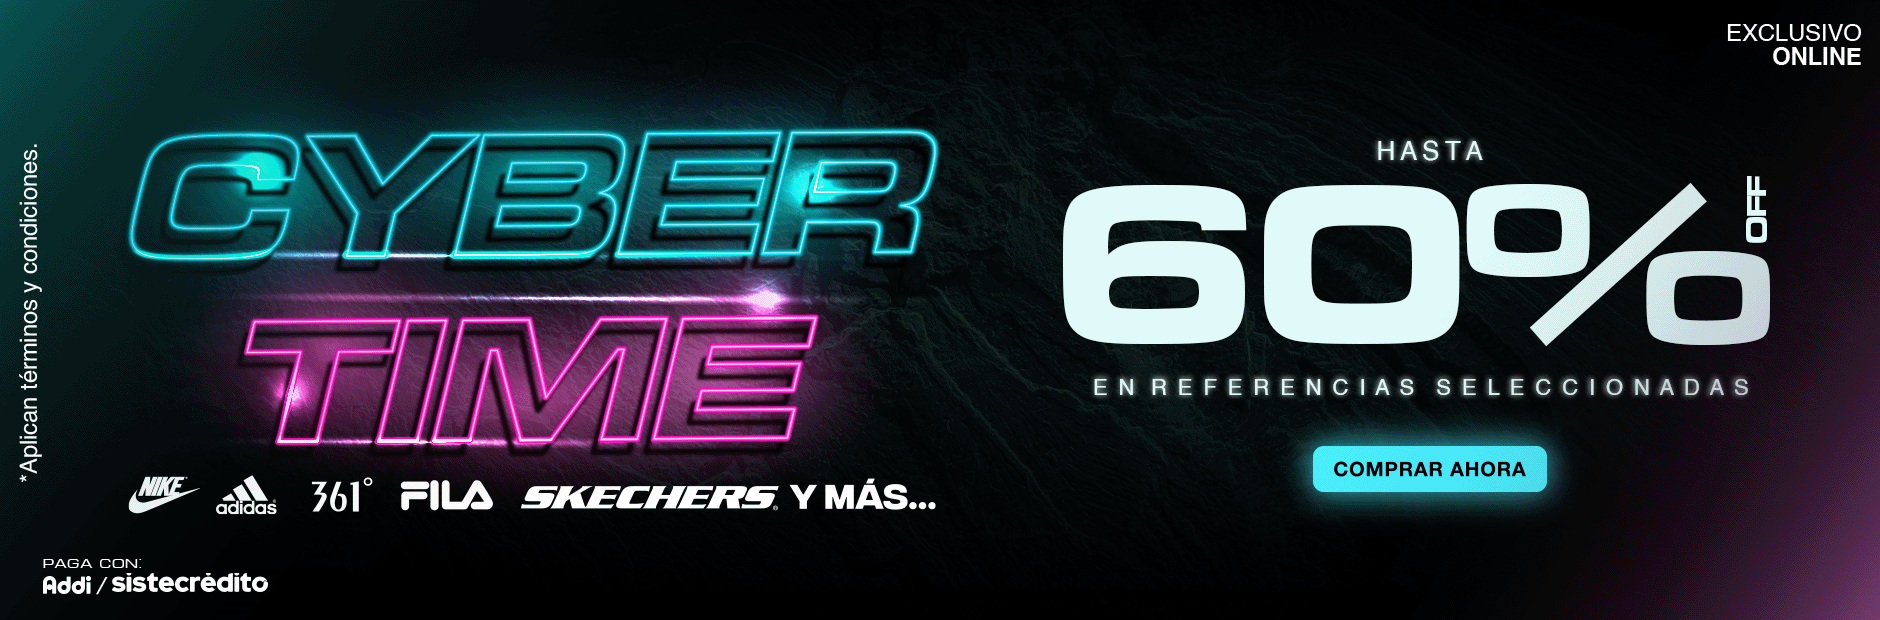 Cyber Time hasta 60%